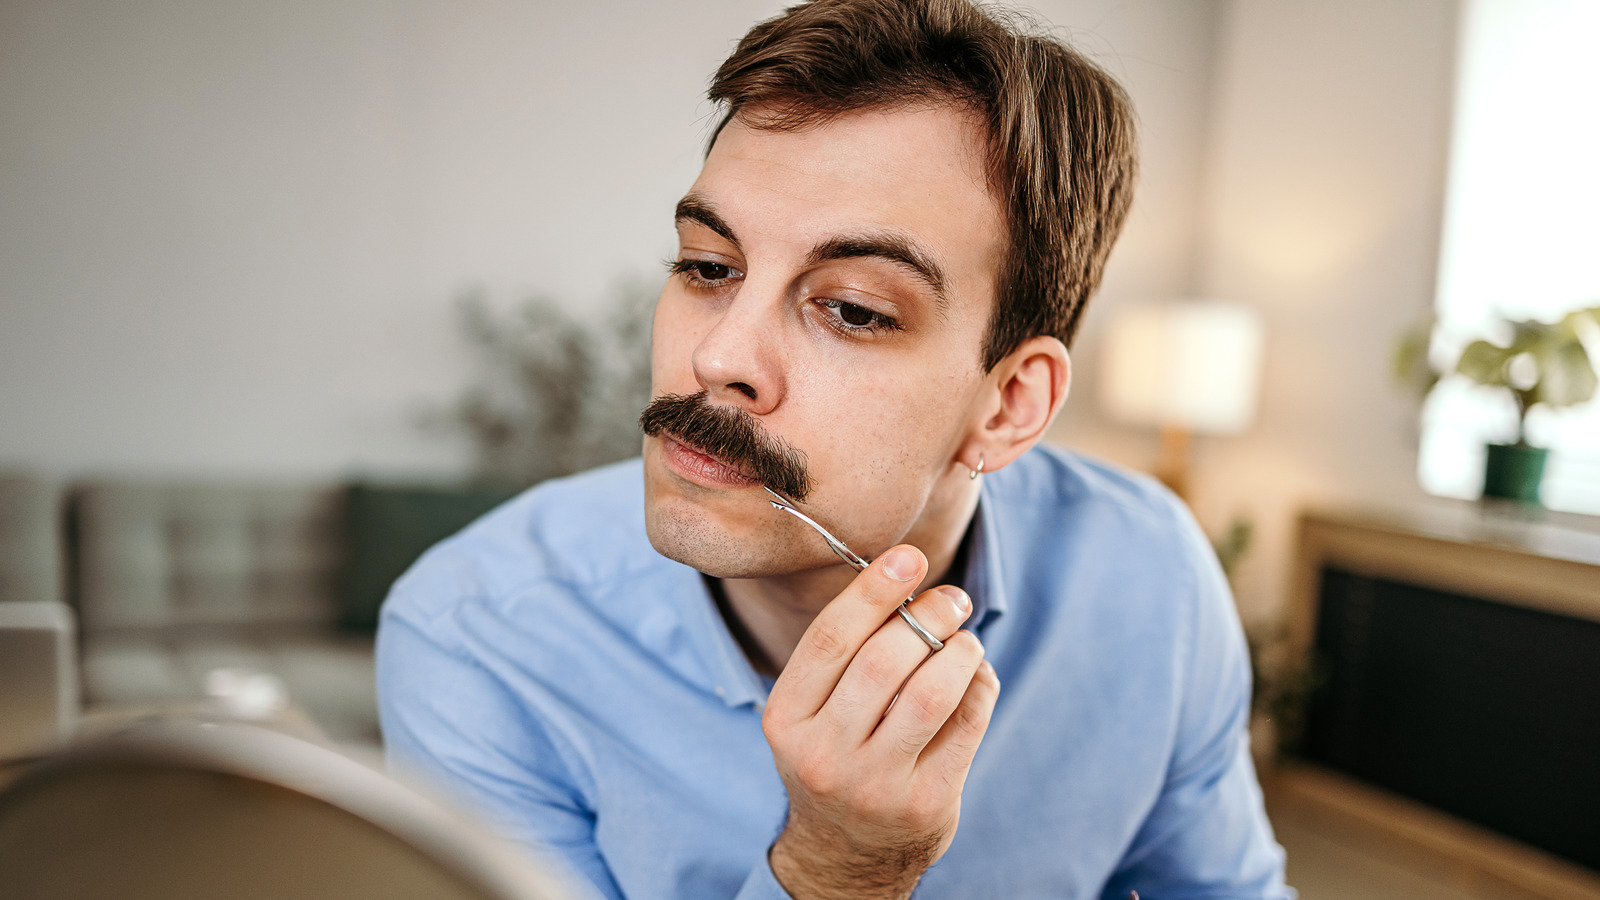 Weird Scientific Facts About Your Mustache You Probably Didn't Know - Health Digest